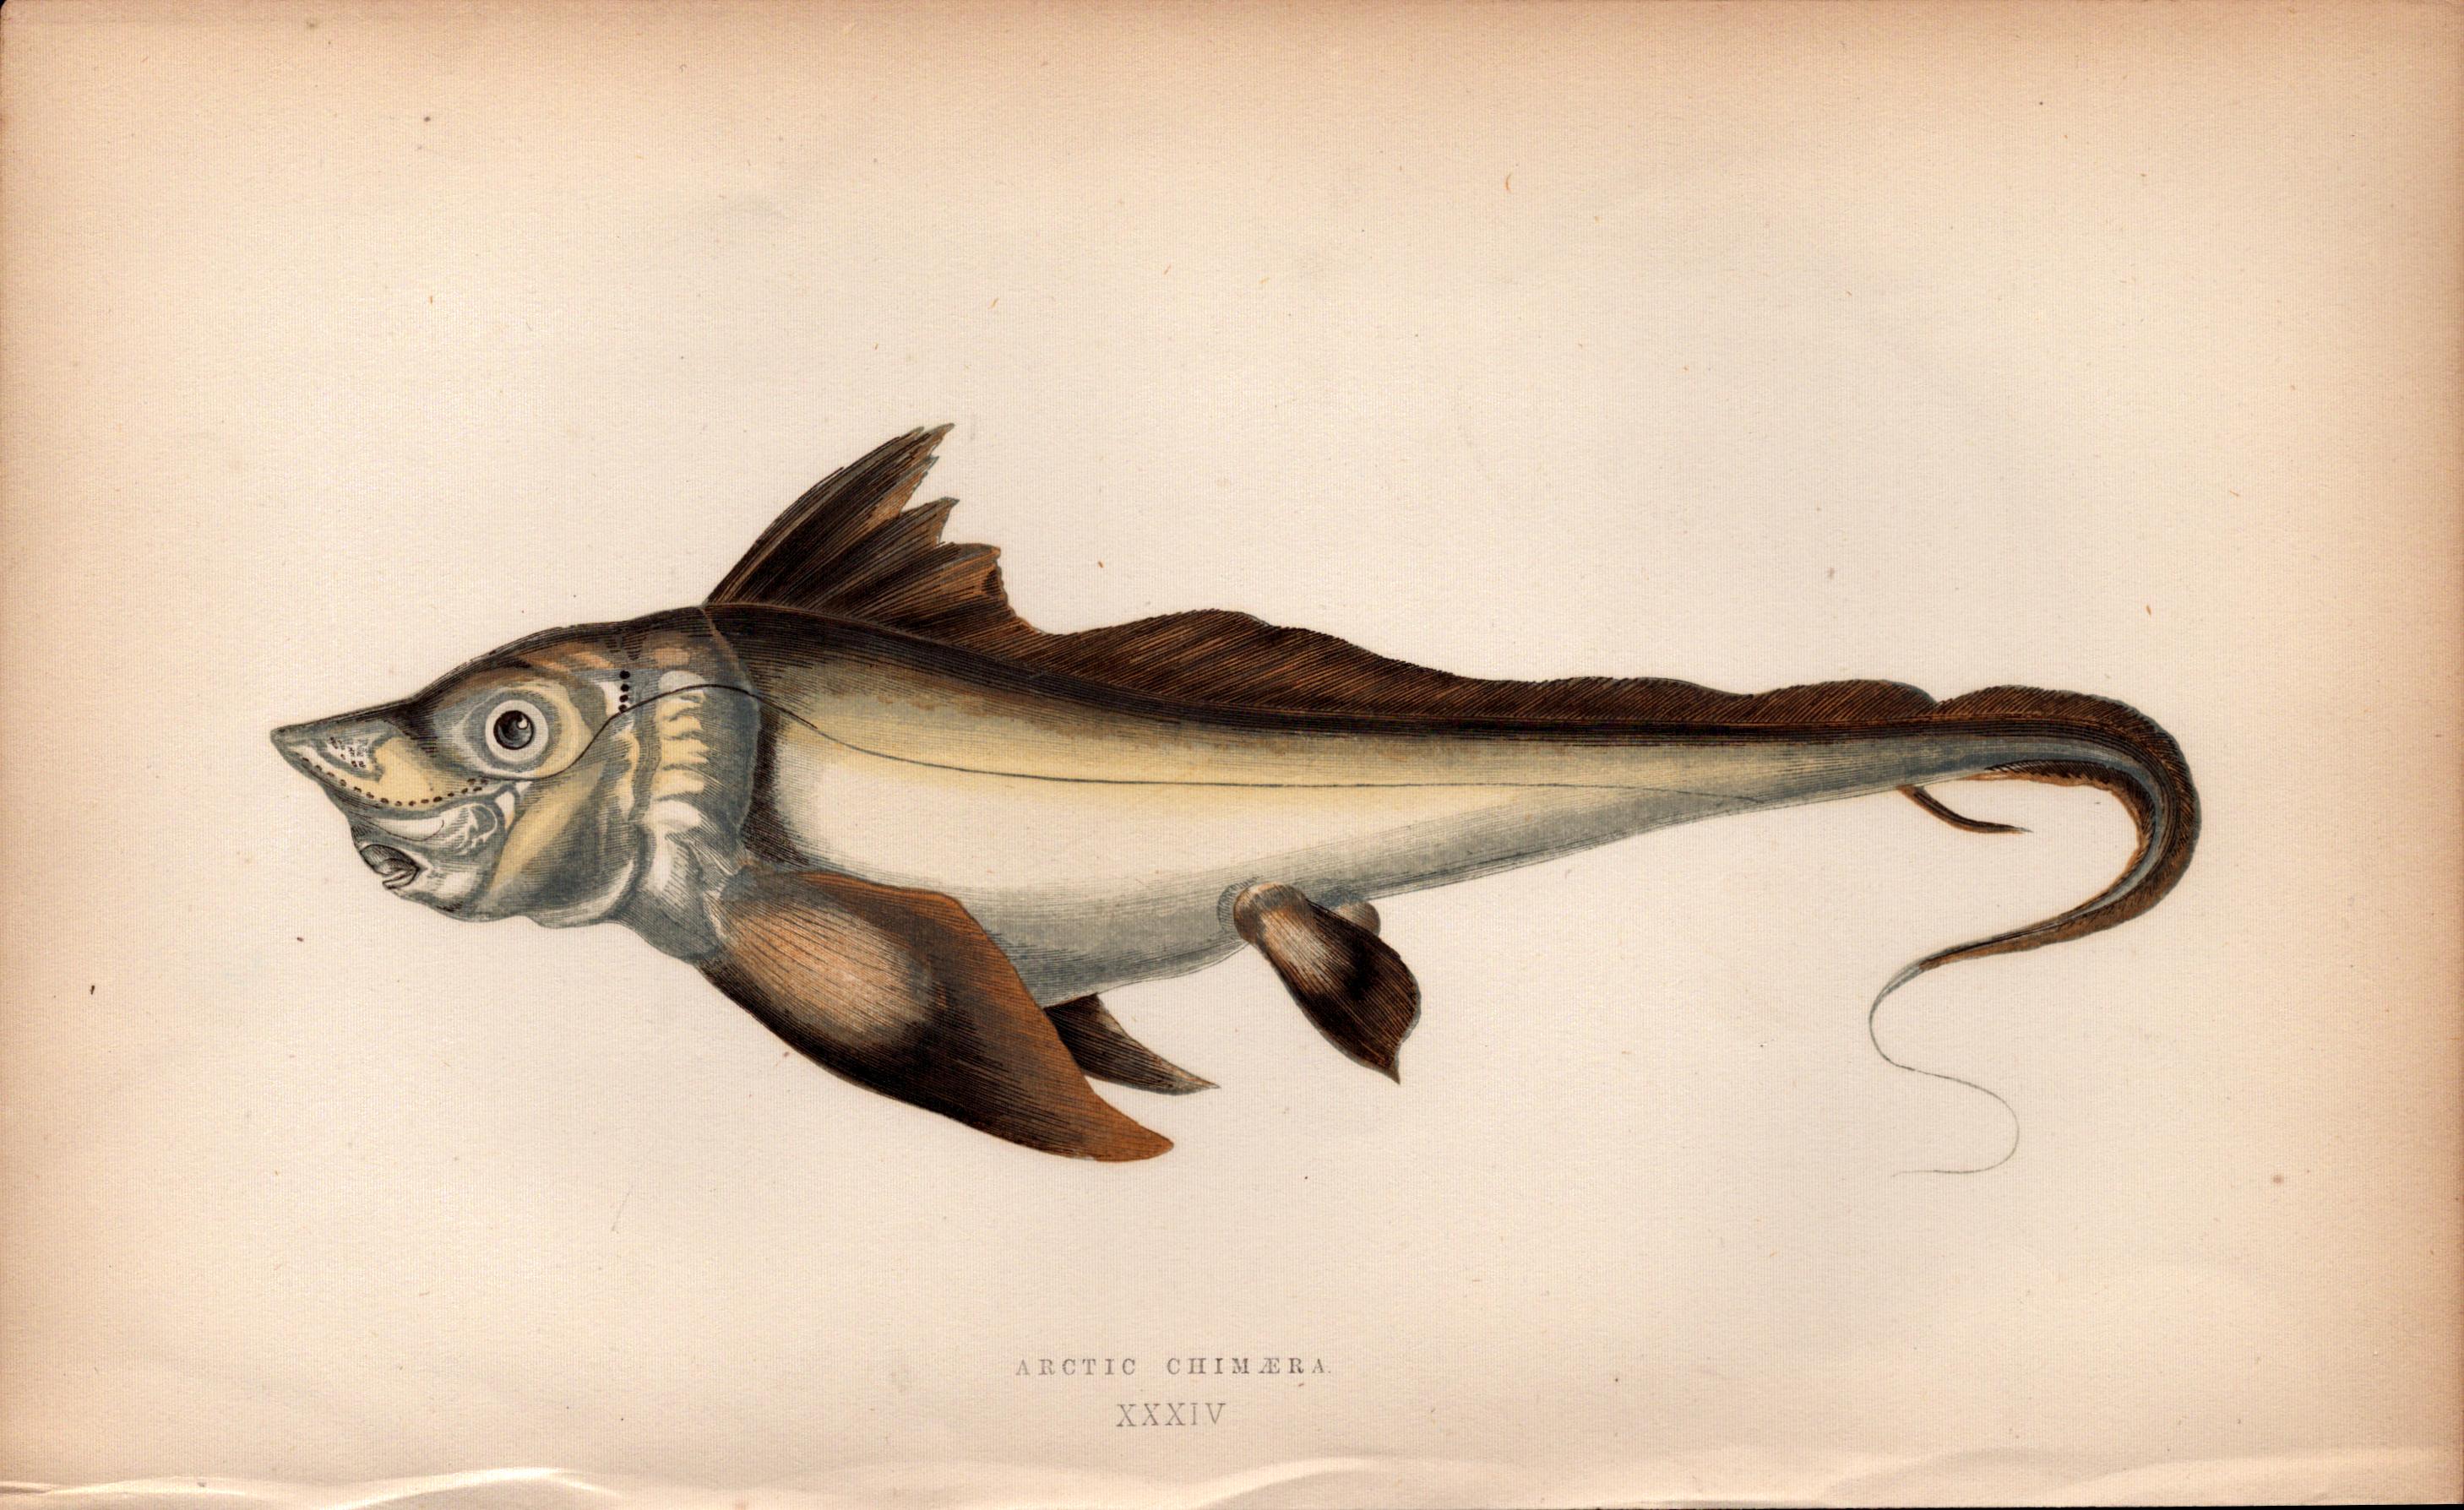 Artic Chimaera 1869 Antique Johnathan Couch Coloured Engraving.